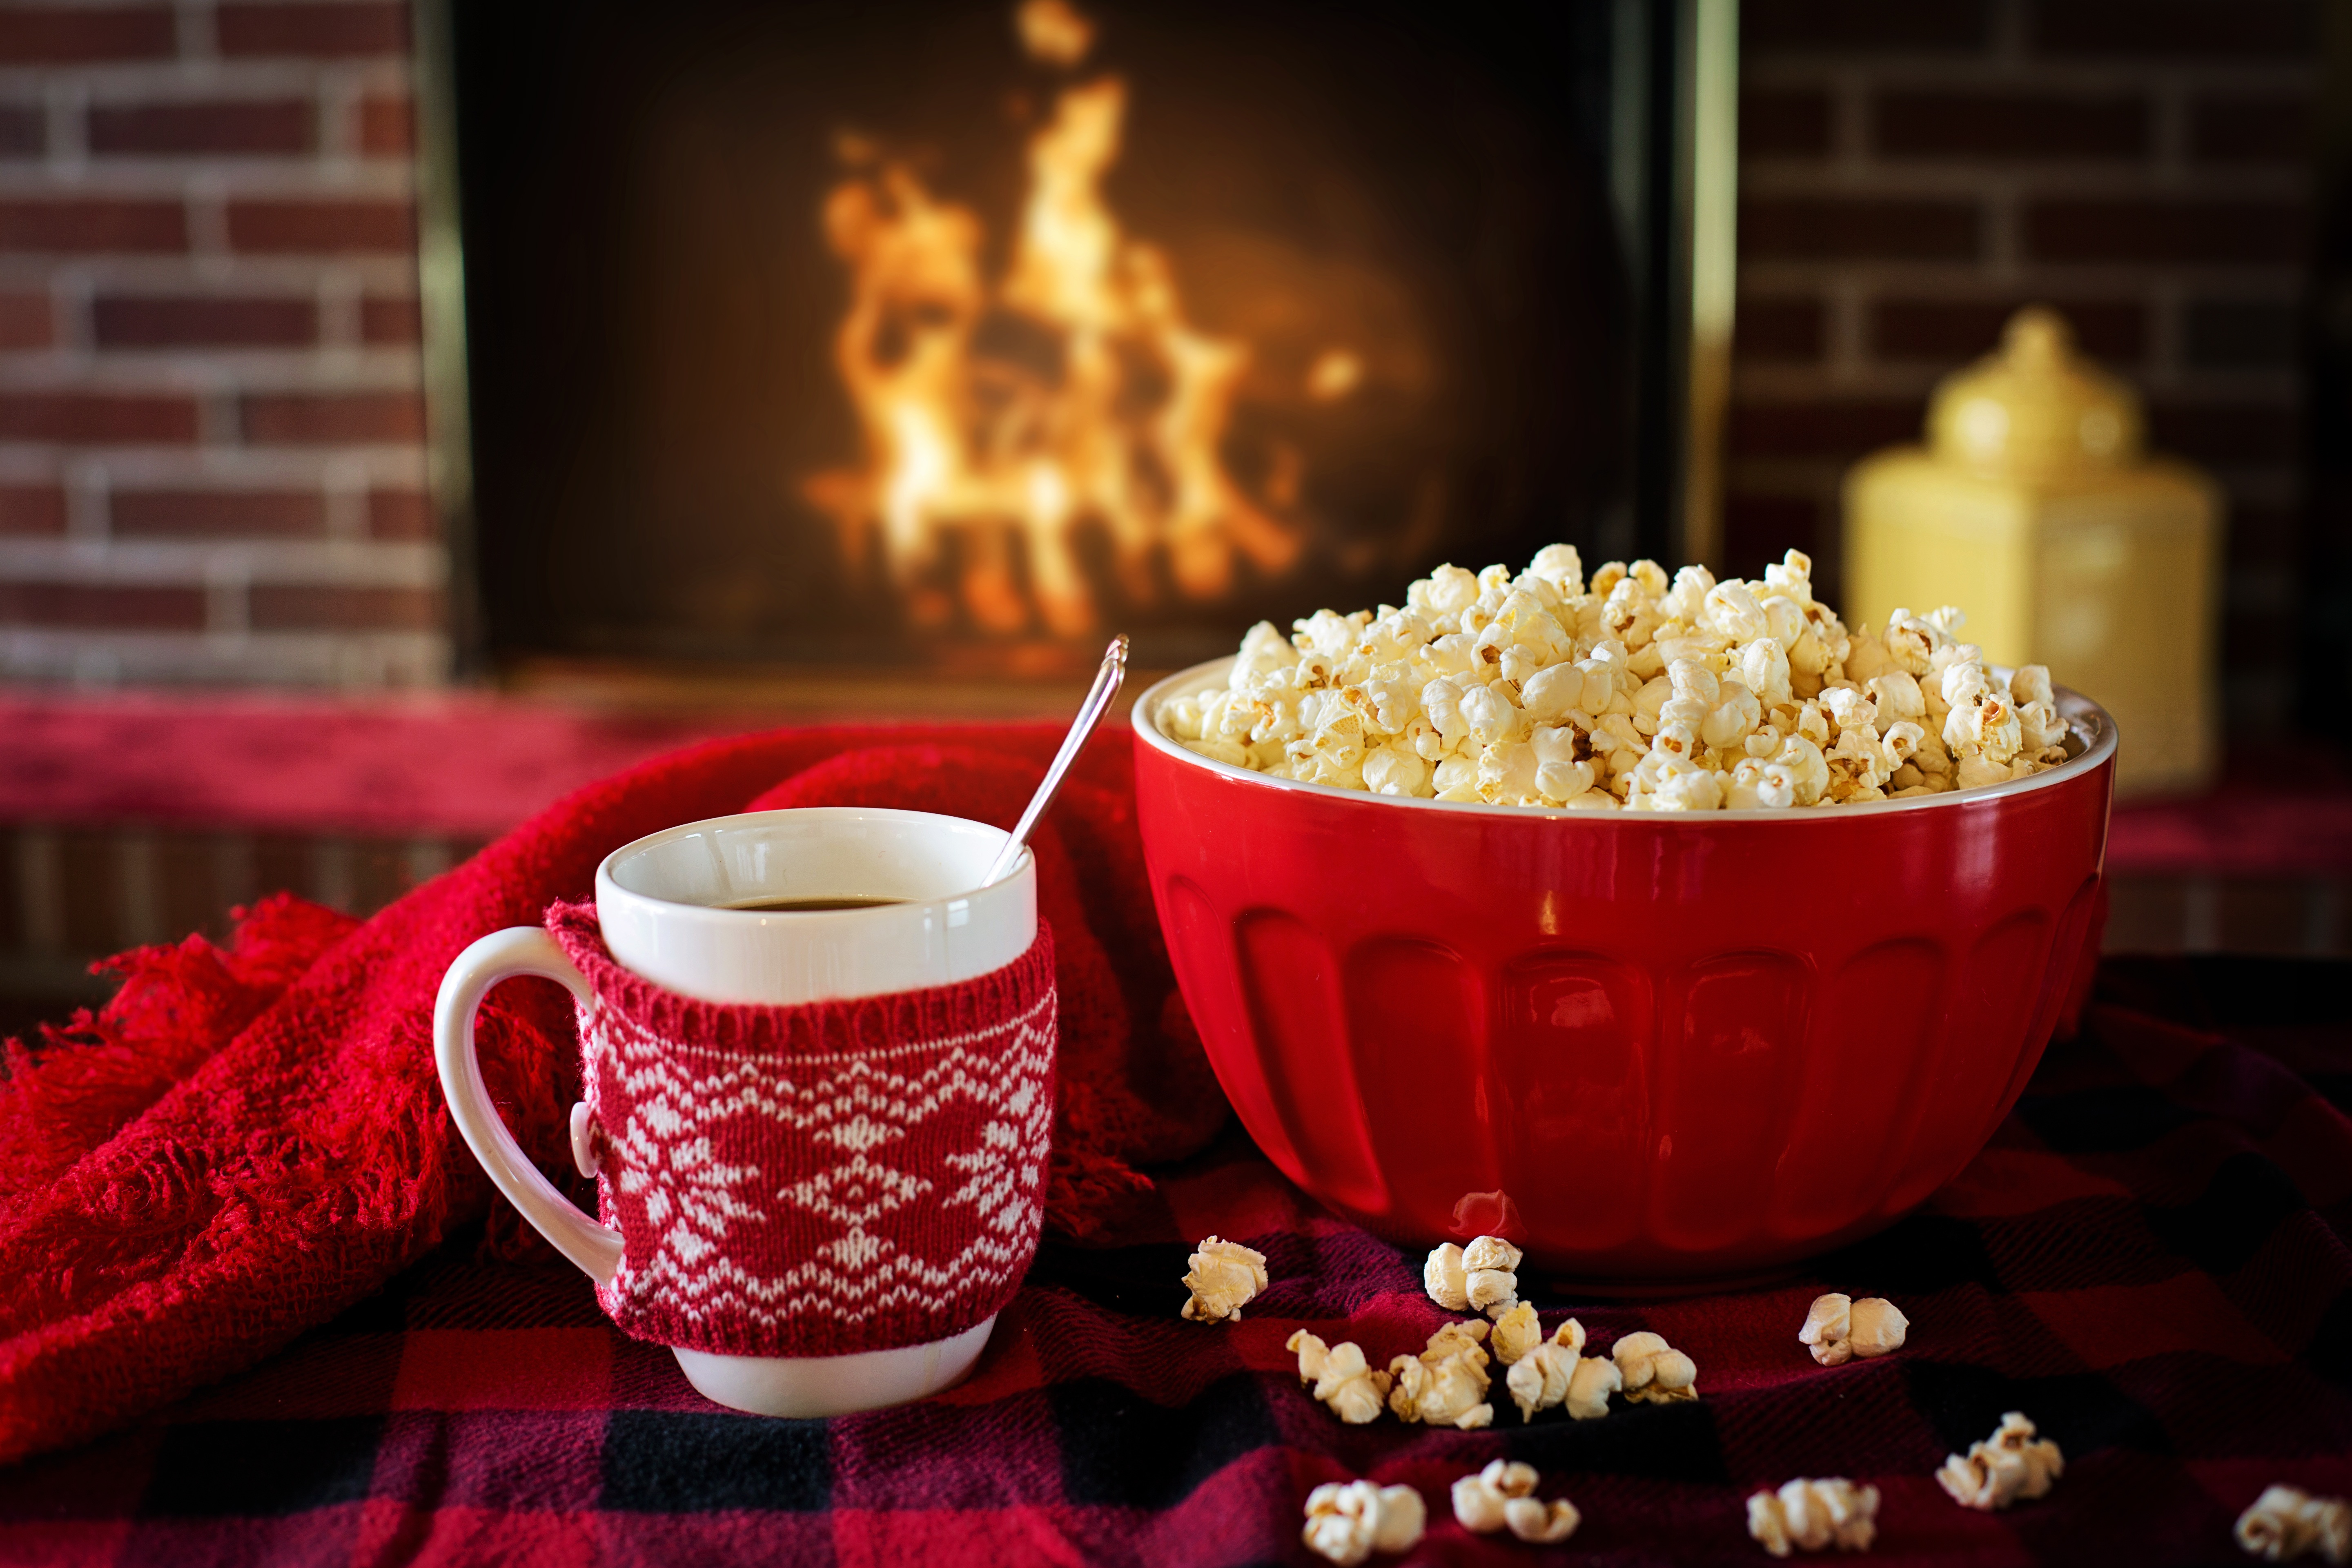 Warm and Cozy With Coffee and Popcorn by Jill Wellington